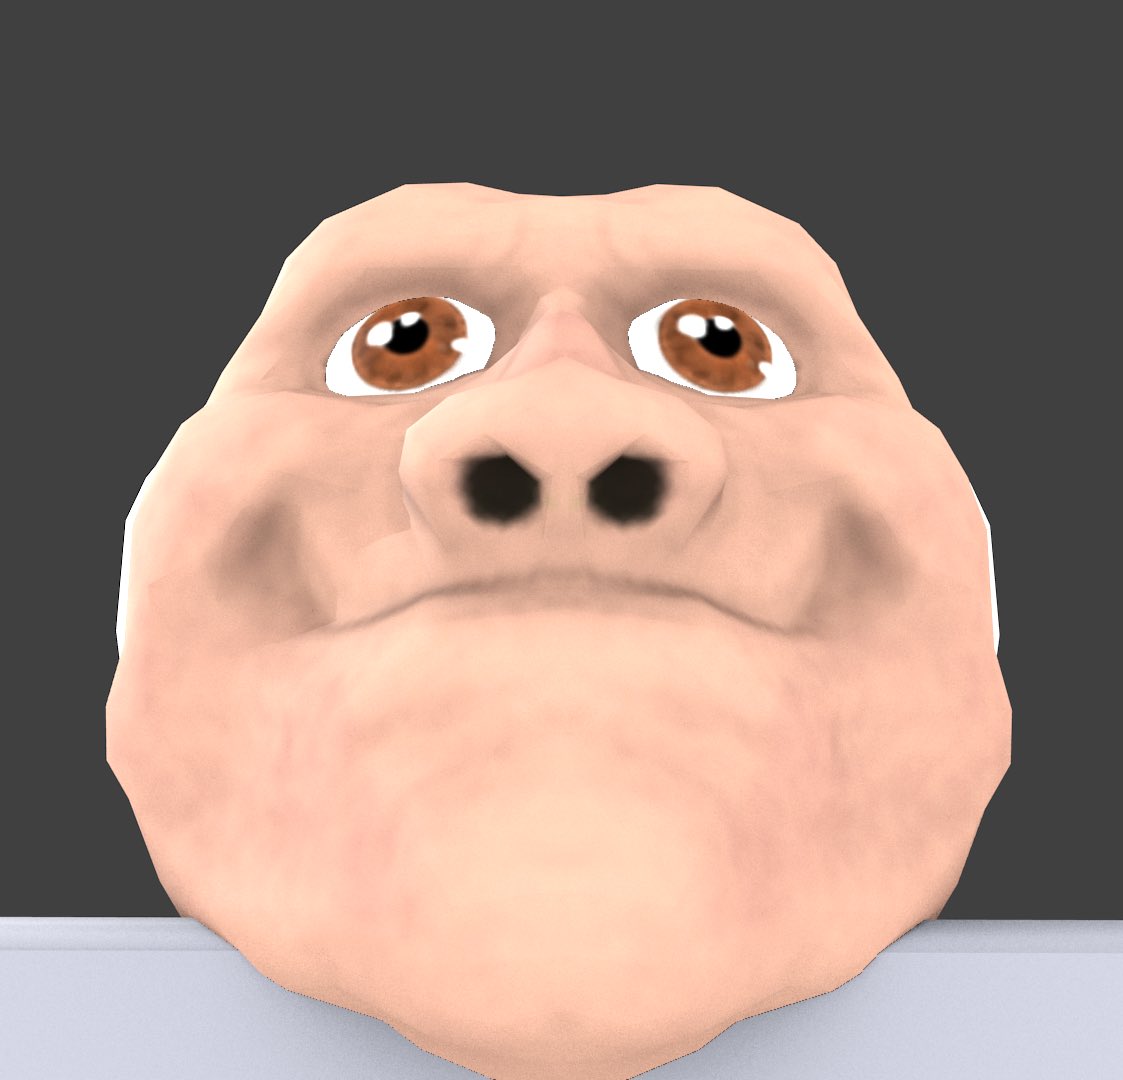 Reverse Polarity On Twitter I Just Want To Know How You Knew What I Looked Like To Be Able To Recreate Me O - old man head roblox